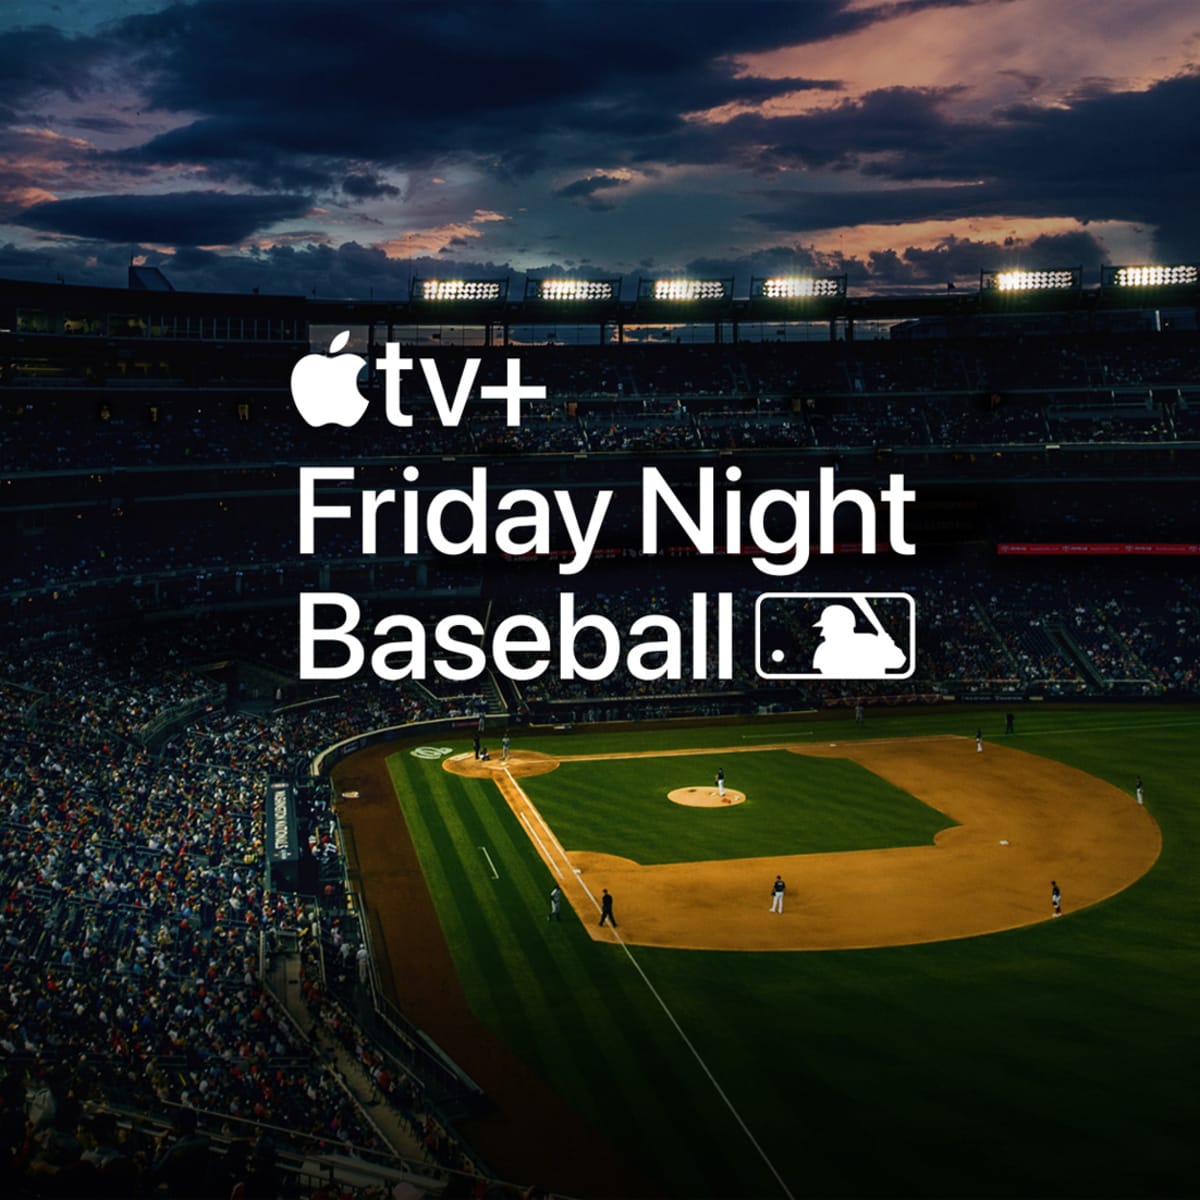 MLB, Apple Announce TV Streaming Deal For Exclusive Friday Night Games